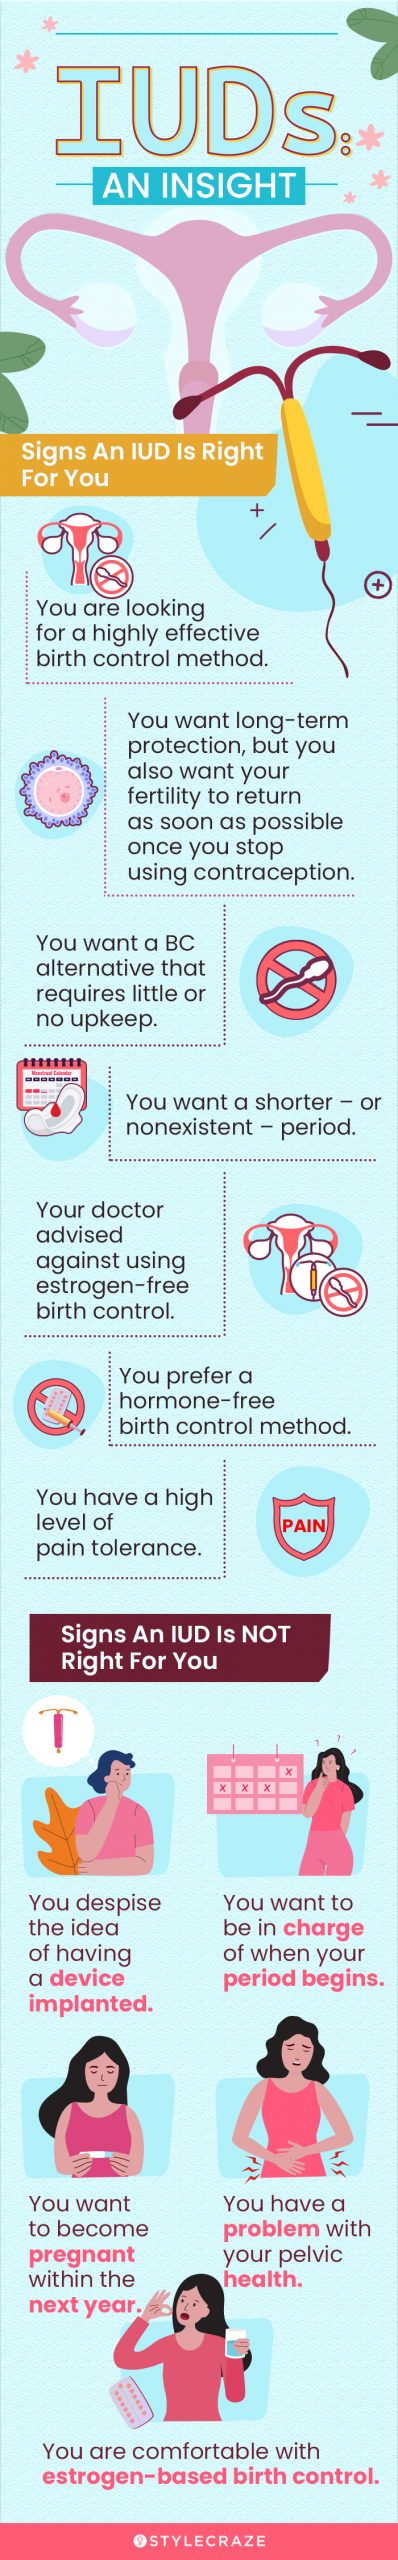 signs and iud is right for you (infographic)